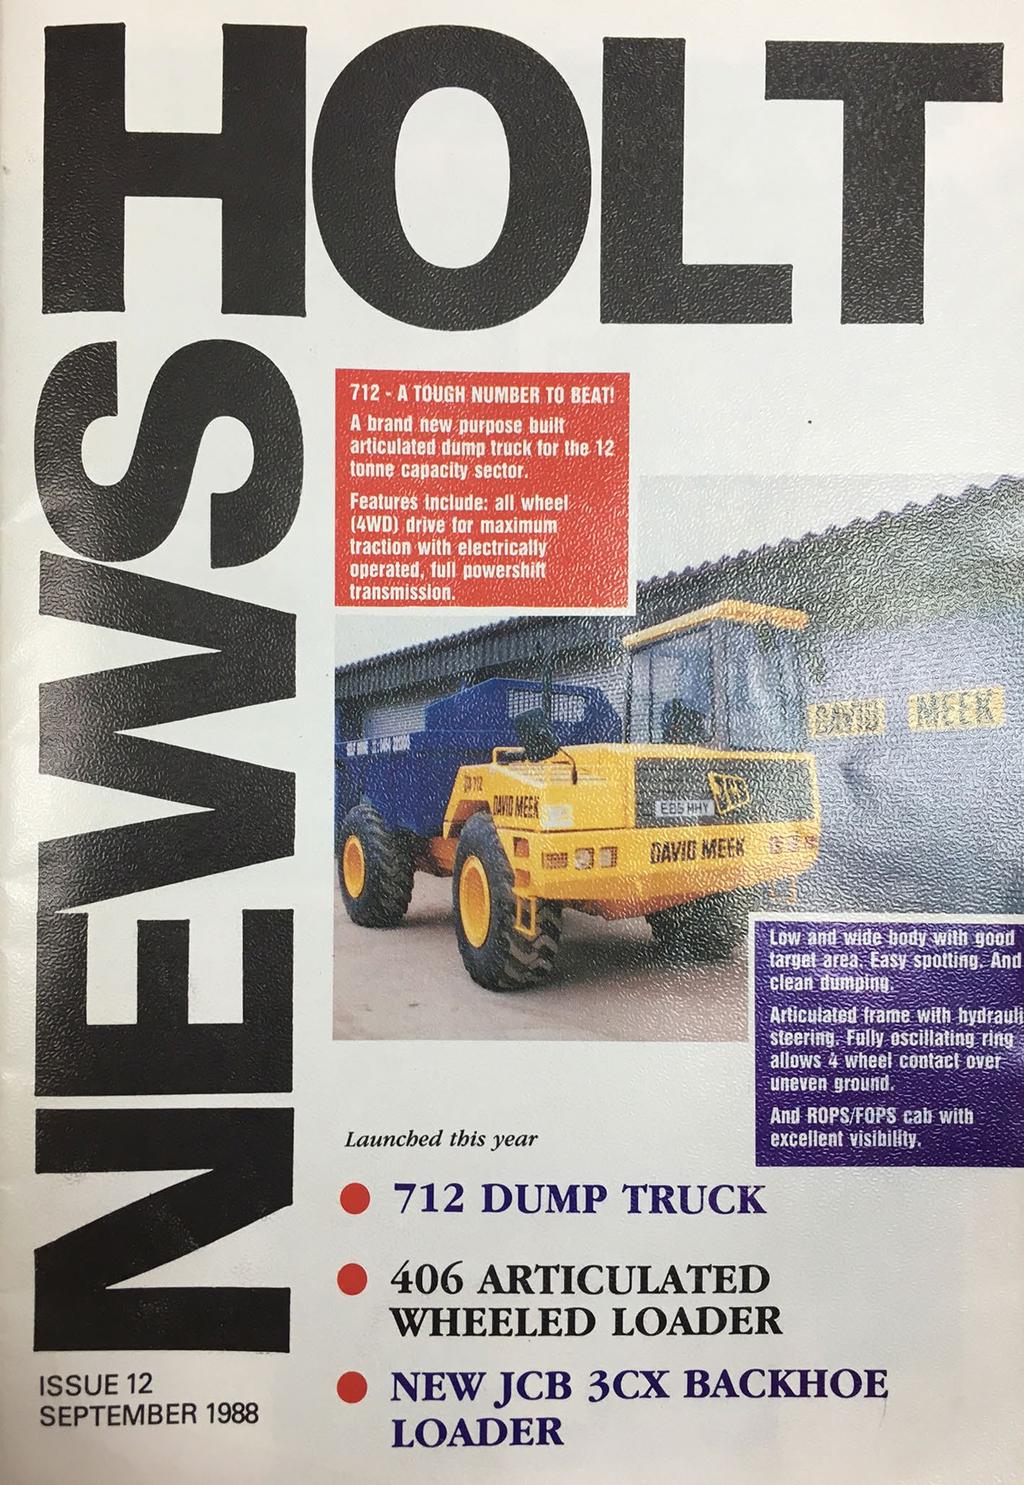 The JCB Sitemaster Tyre was also on offer back in 1988!